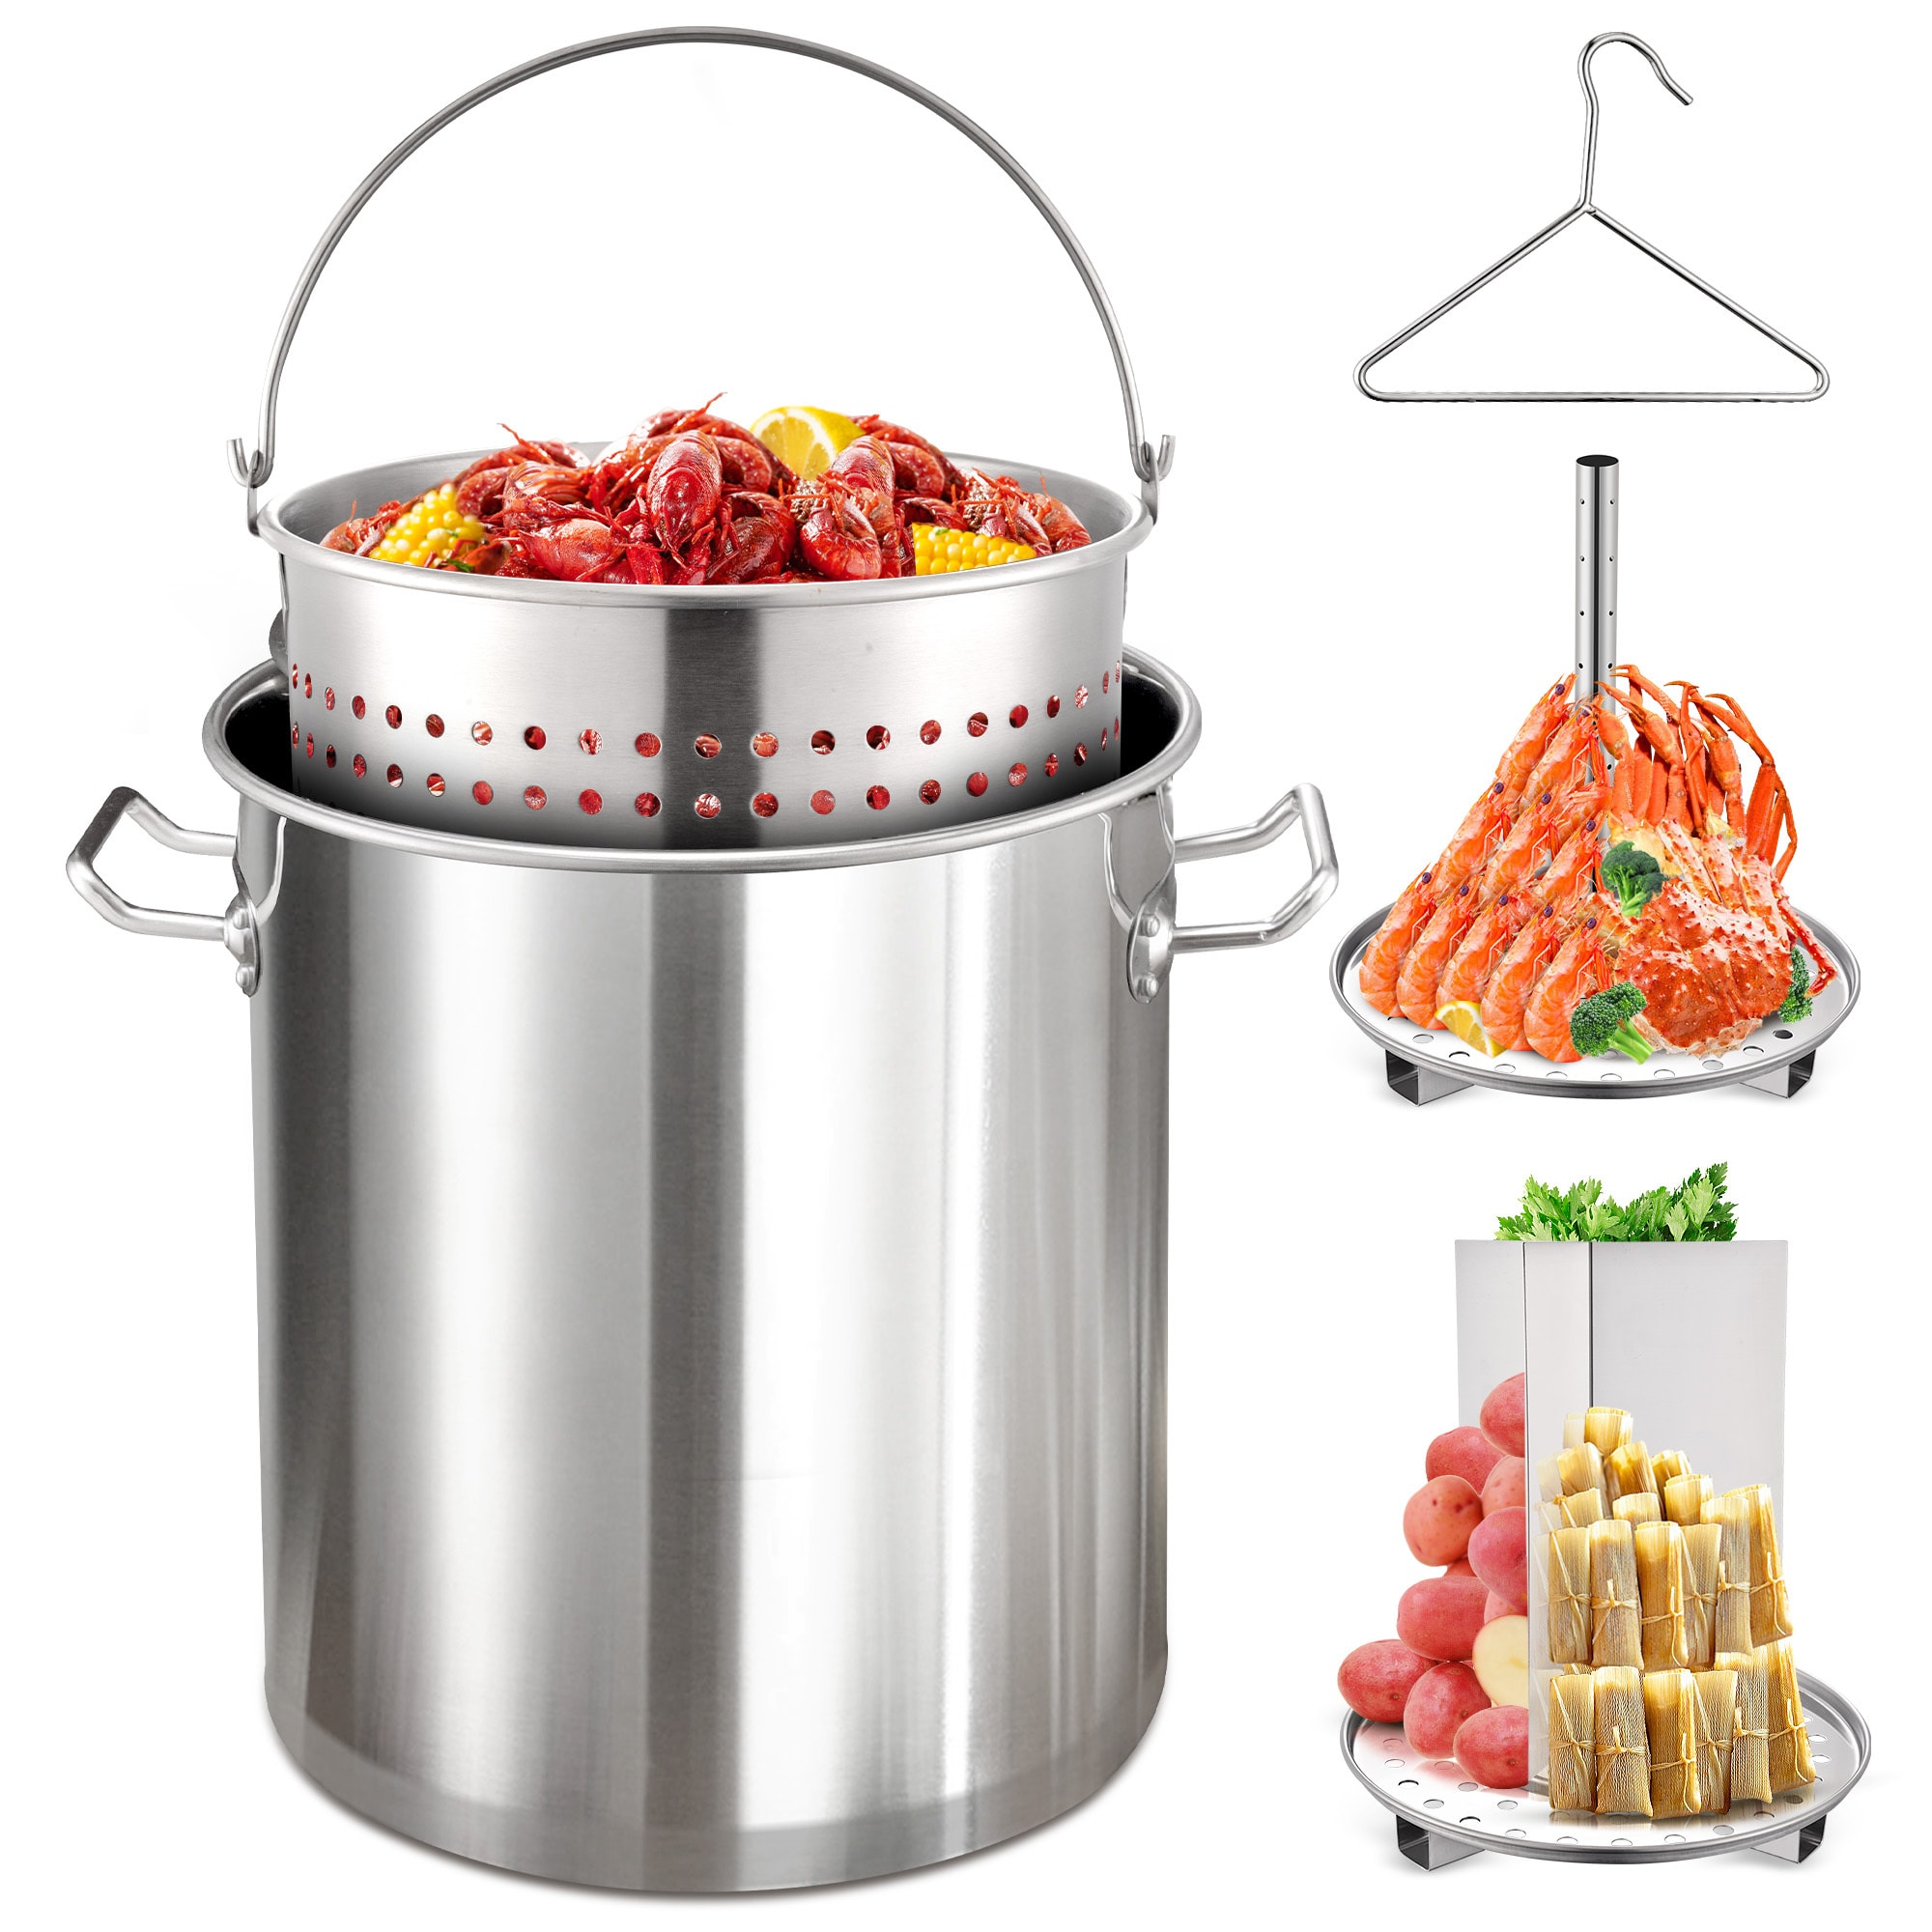 84 qt. Aluminum Cooking Stock Pot with Basket for Steaming Tamales